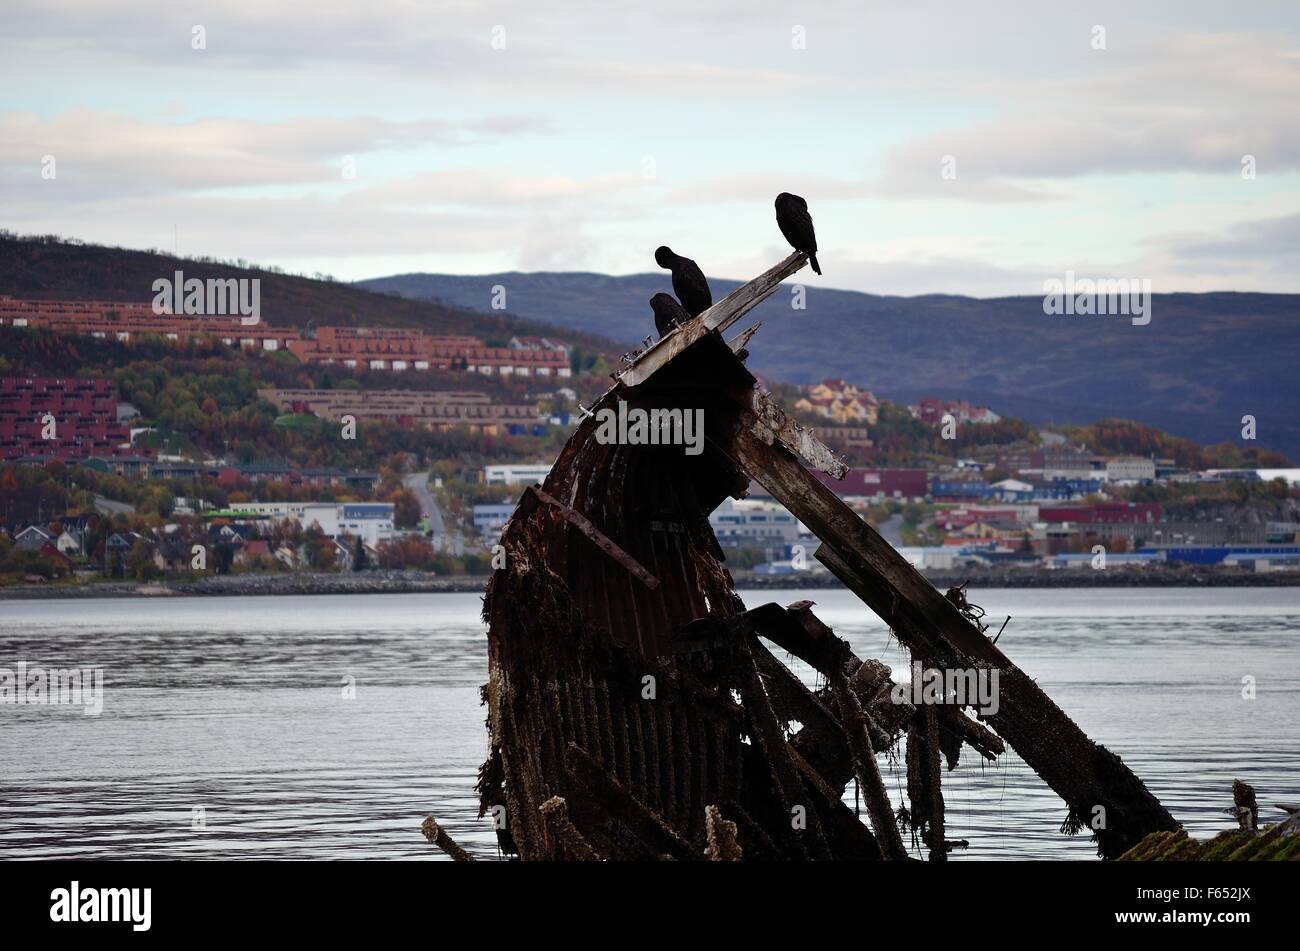 beautiful big black cormorant birds sitting on a old wooden ship wreck in cold fjord Stock Photo